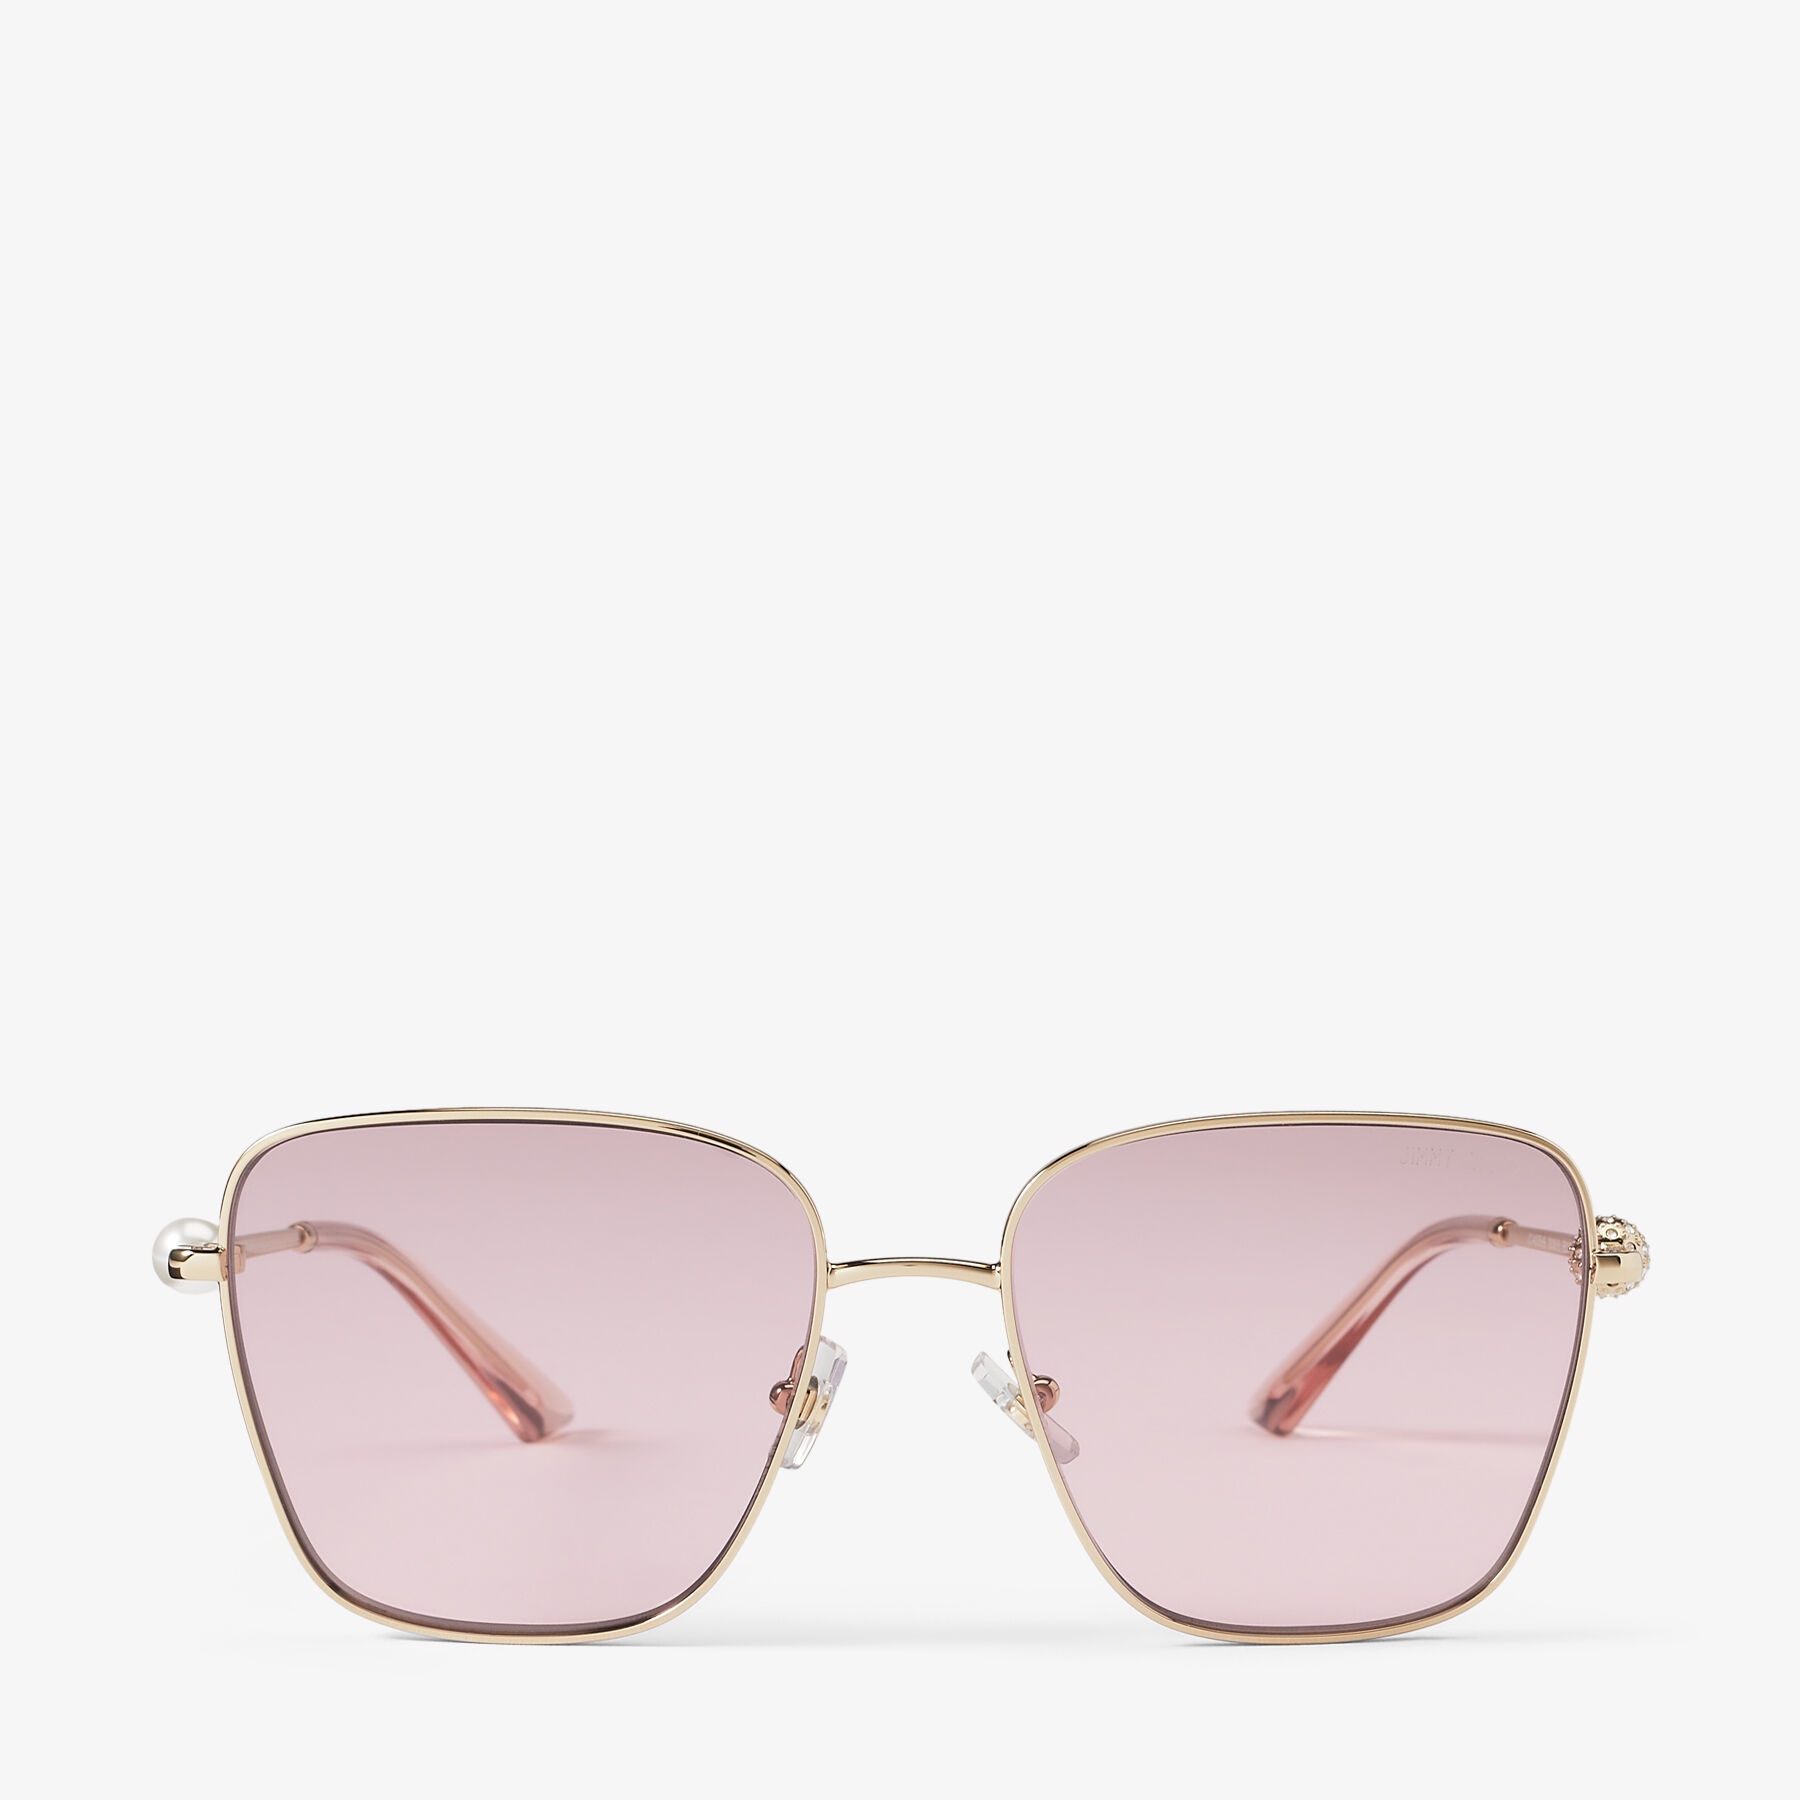 Pua
Pale Gold Square Sunglasses with Crystals - 1